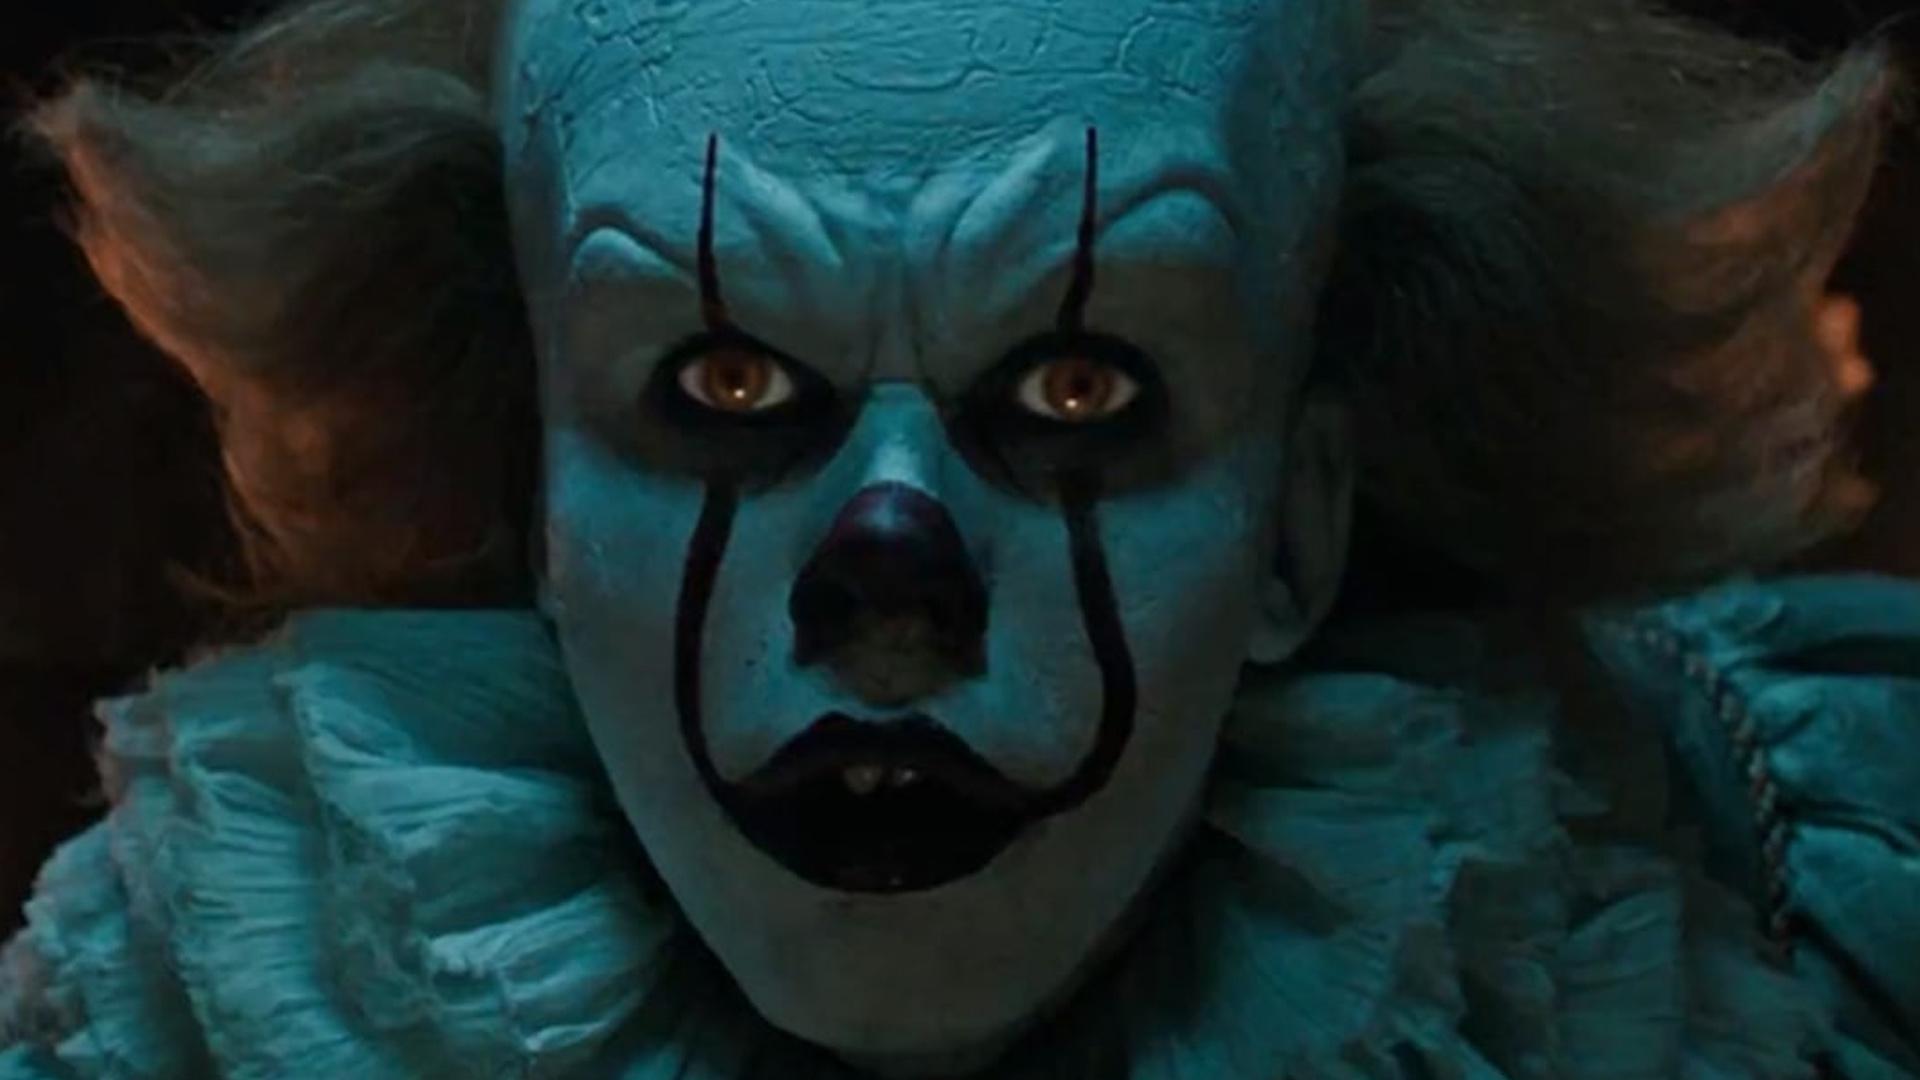 IT Star Bill Skarsgard Says He Wants IT: CHAPTER 2 To Explore